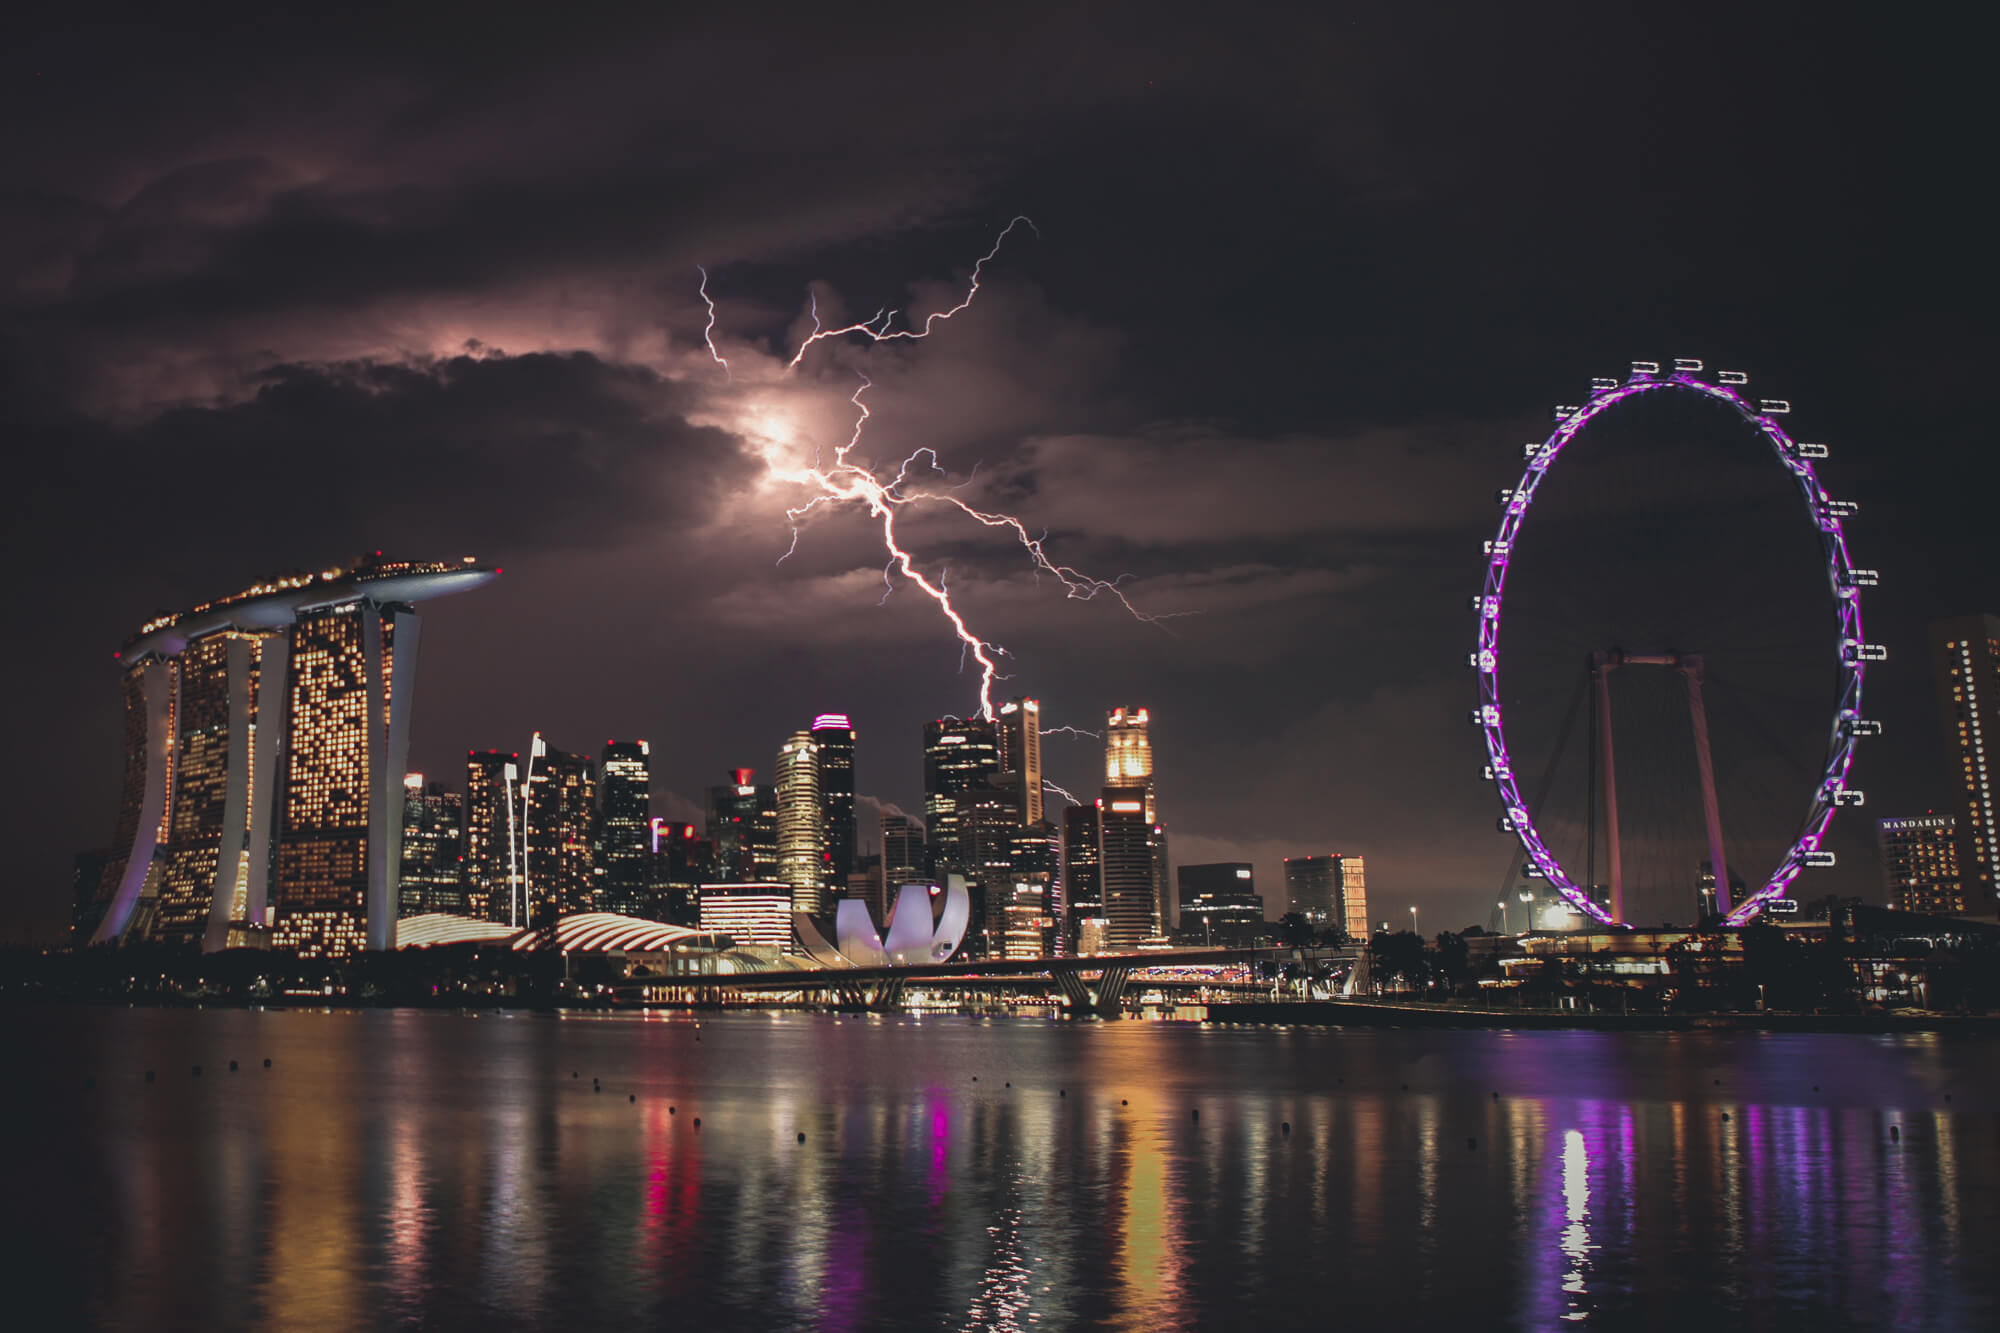 A vibrant nighttime cityscape of Singapore with lightning striking the sky. The illuminated skyline features the Marina Bay Sands hotel, the lotus-shaped ArtScience Museum, and the glowing Singapore Flyer Ferris wheel, all reflecting on the tranquil water.